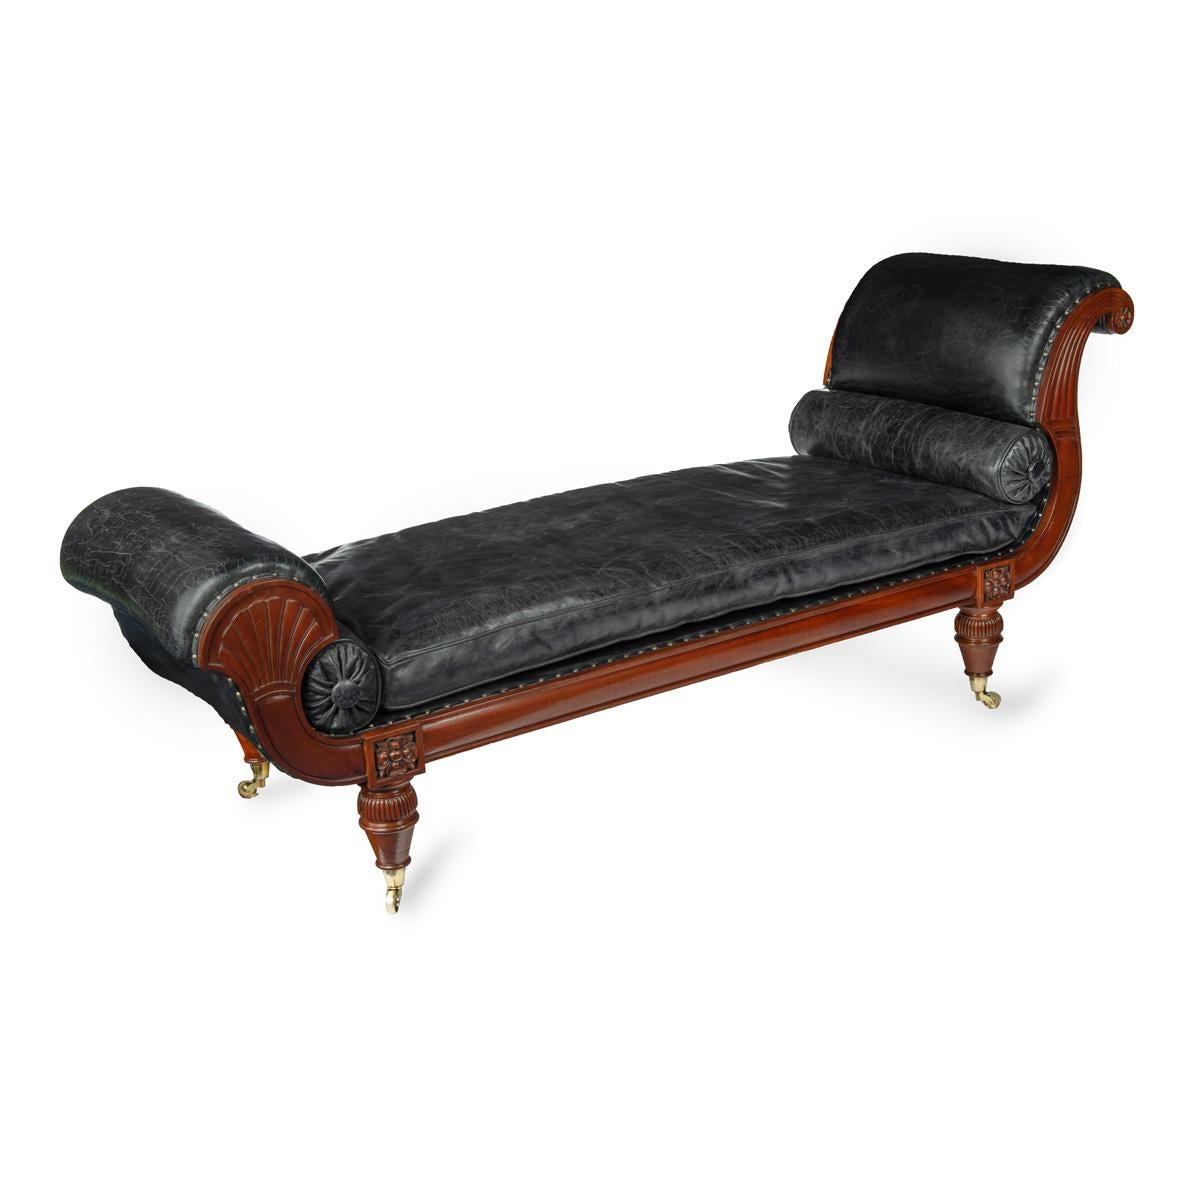 An unusual pair of Regency mahogany day beds in the manner of Gillows, one facing left and the other facing right, each having a scroll and a bolster at one end and lotus fan at the other, raised on tapering legs with gadrooned caps and original